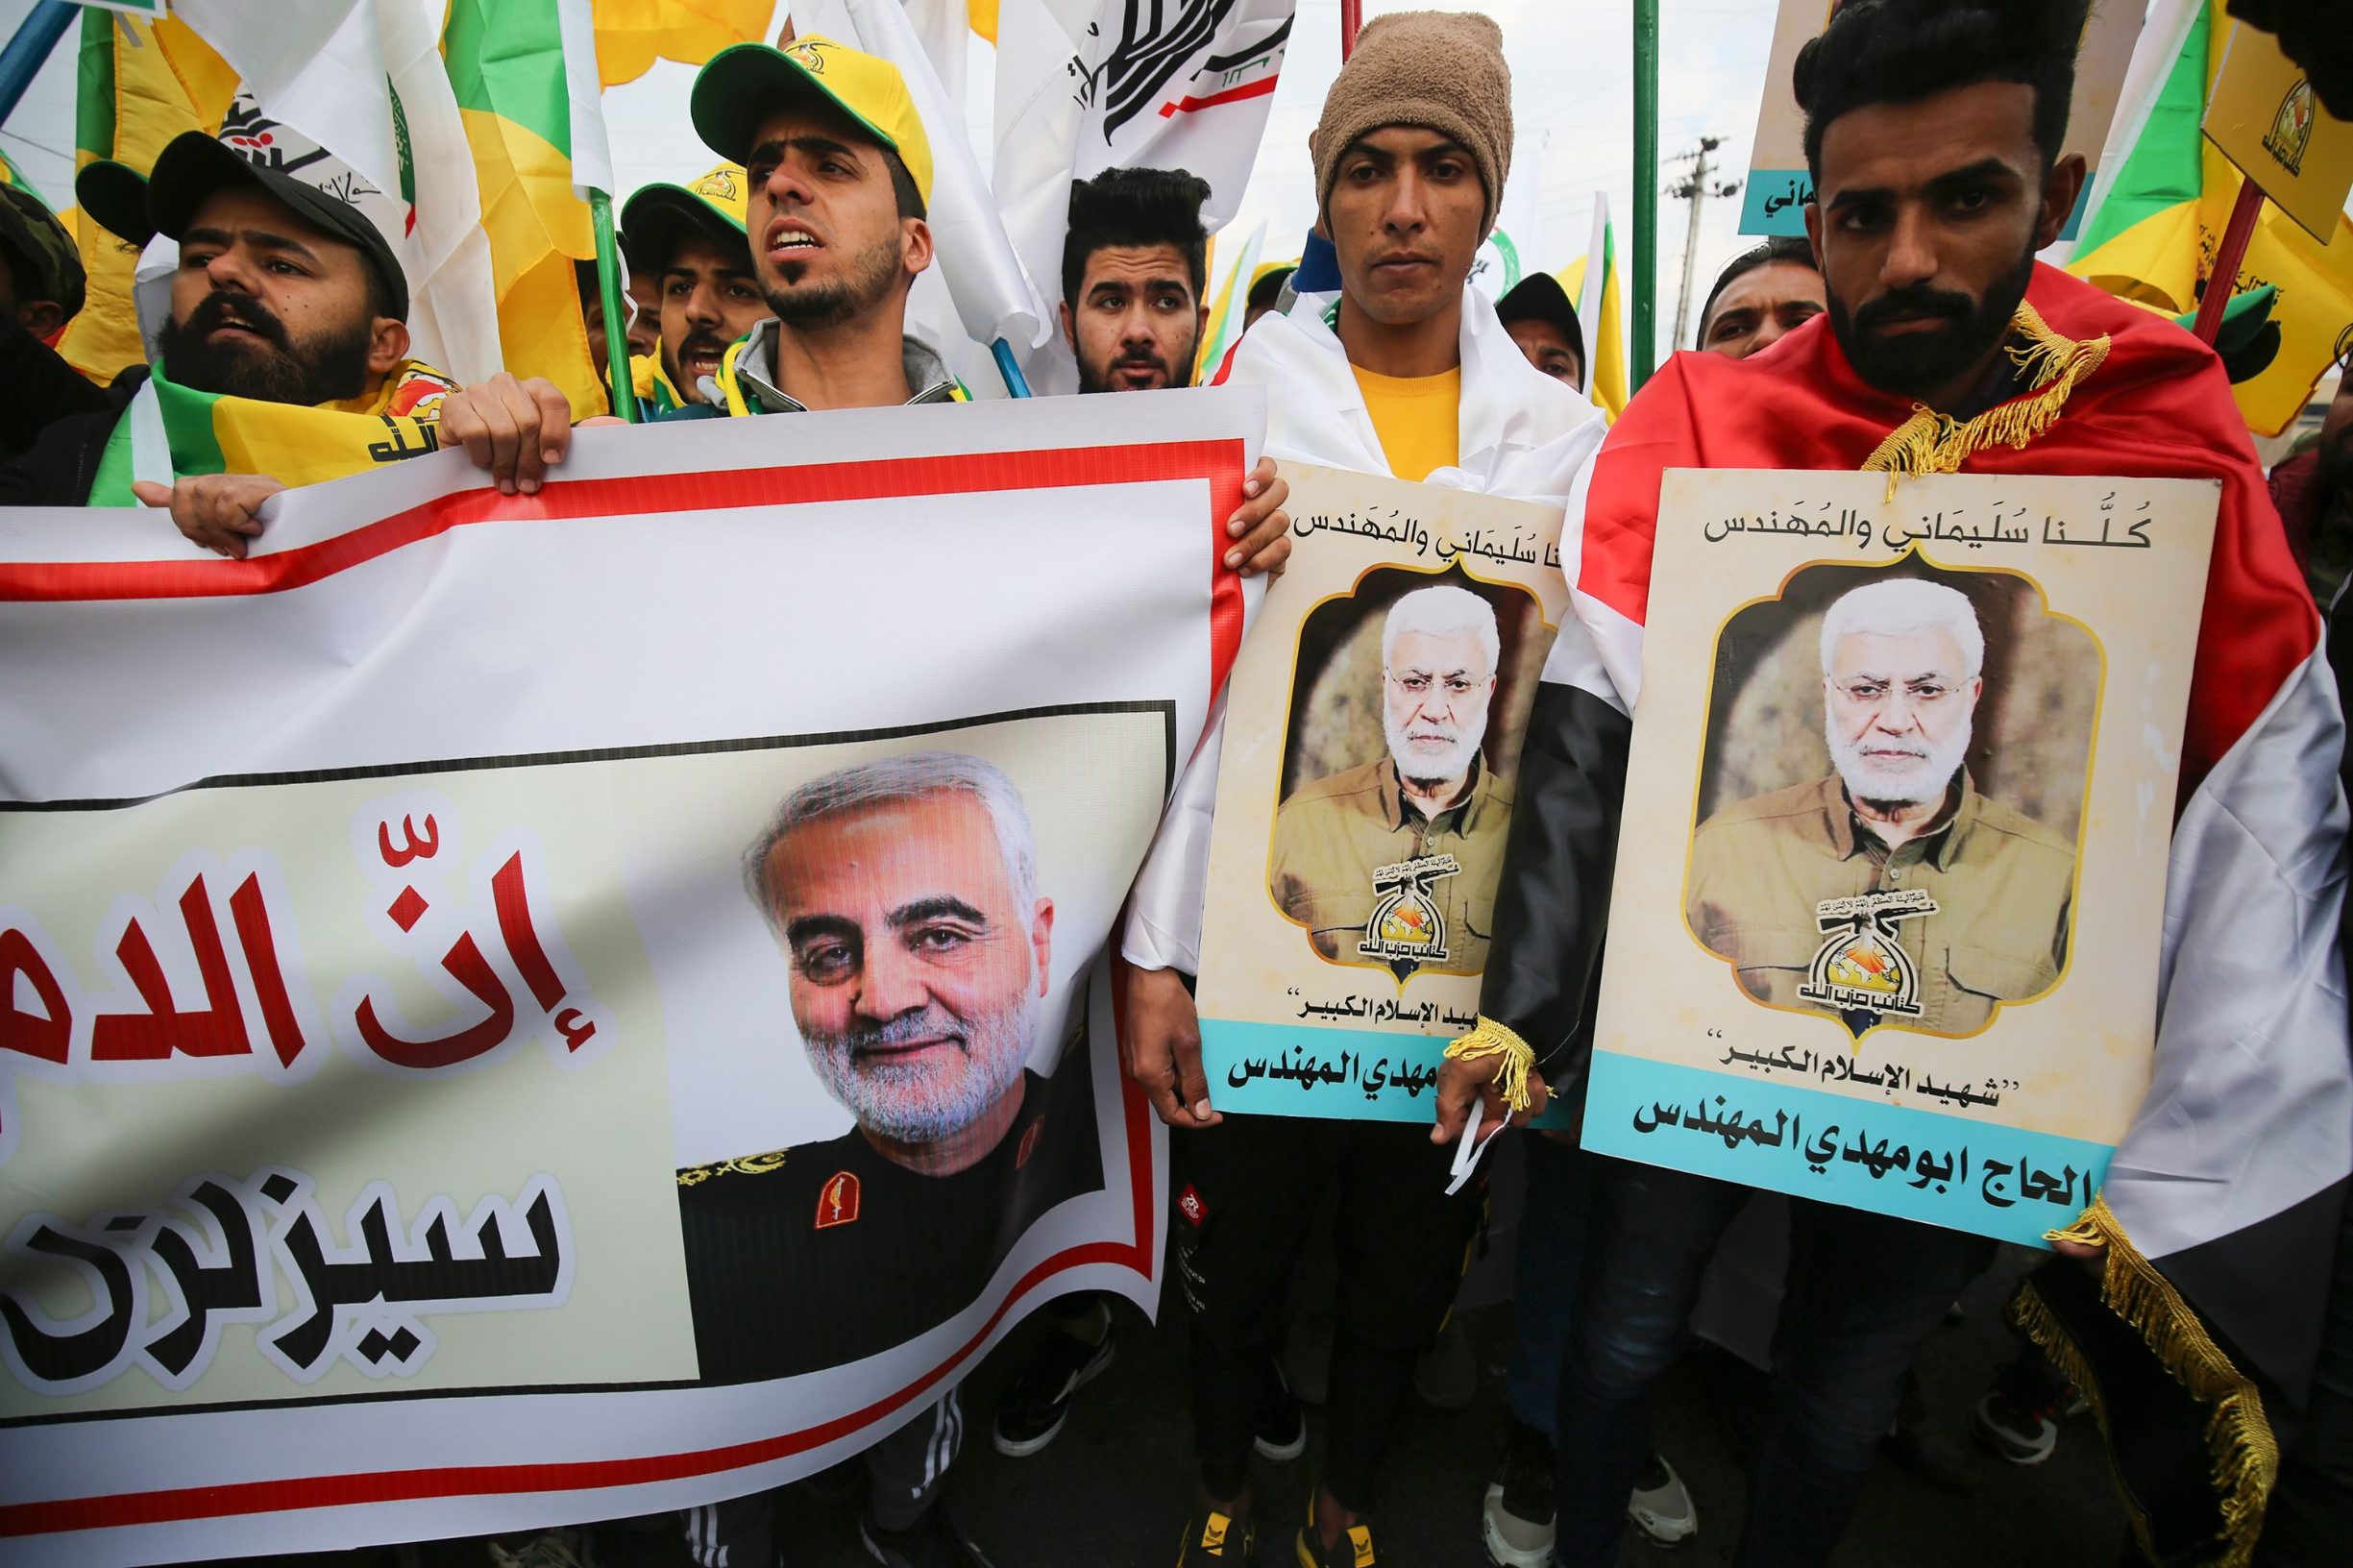 Supporters of the Hashed al-Shaabi paramilitary force and Iraq's Hezbollah brigades attend the funeral of Iranian military commander Qasem Soleimani (portrait) and Iraqi paramilitary chief Abu Mahdi al-Muhandis (portrait) in Baghdad's district of al-Jadriya, in Baghdad's high-security Green Zone, on January 4, 2020. - Thousands of Iraqis chanting 